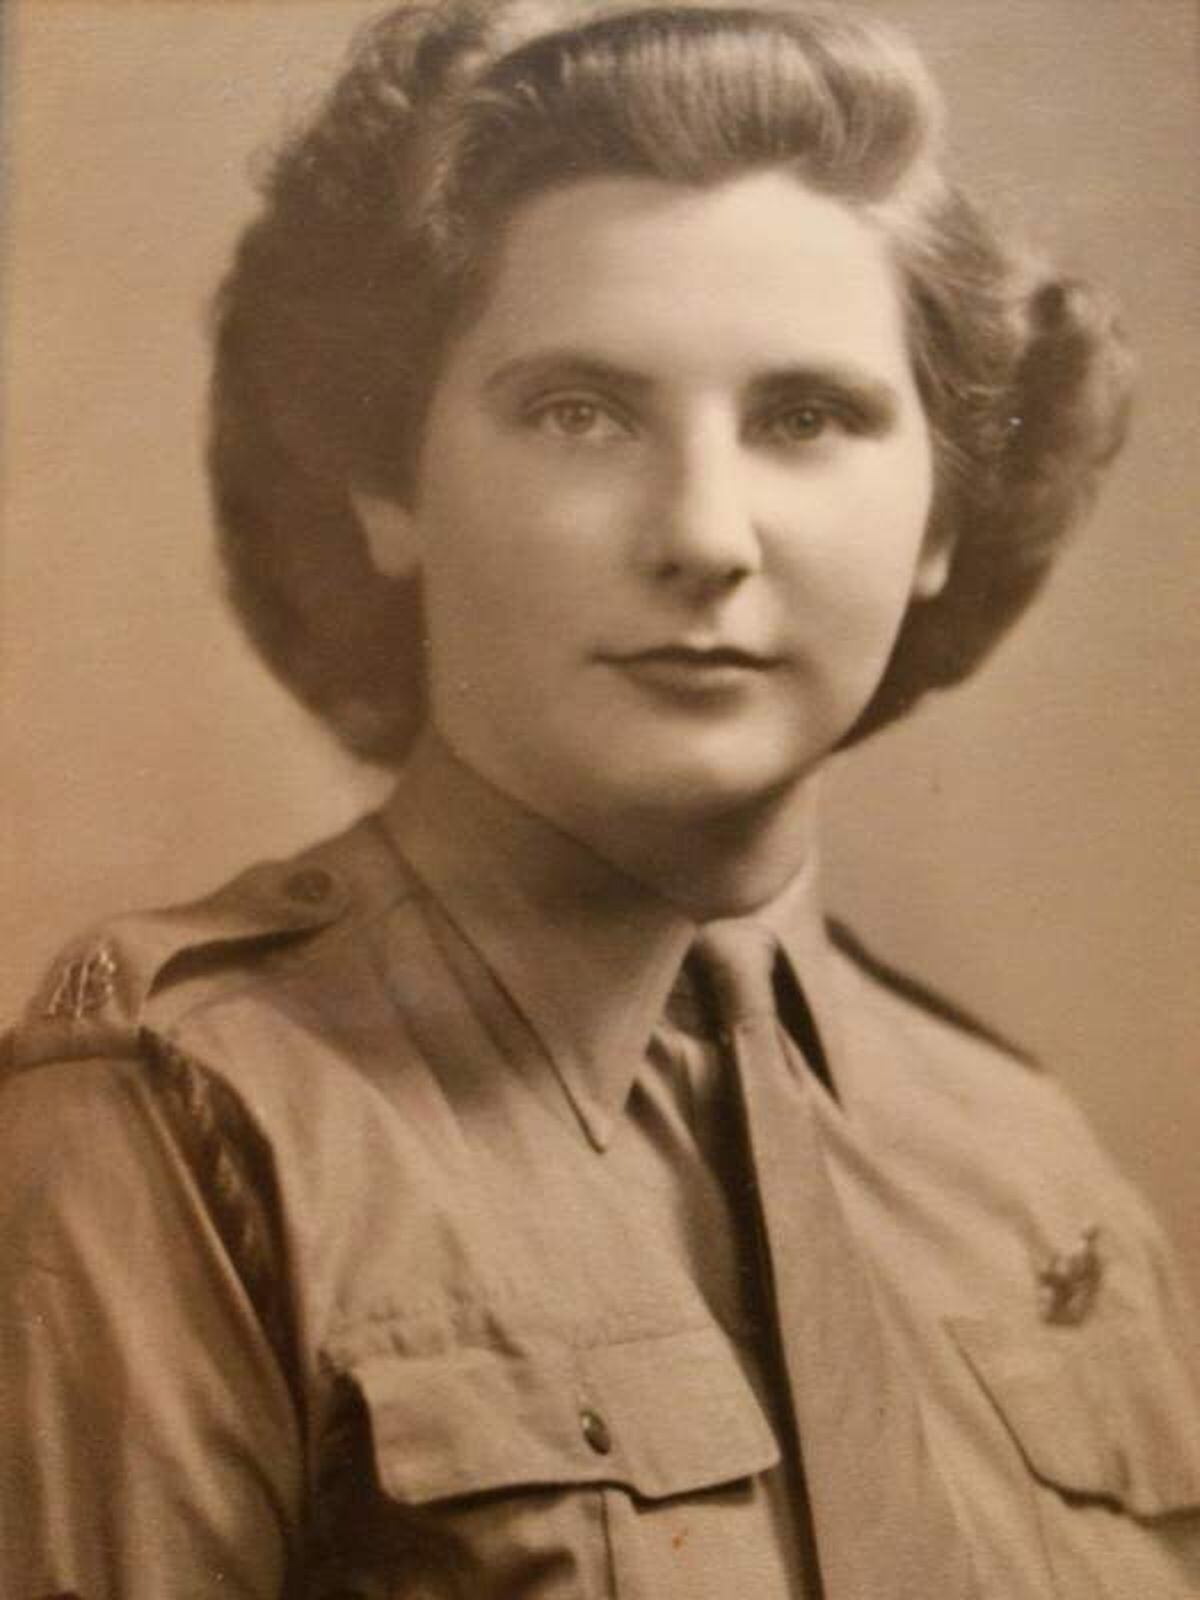 Shropshire's Betty Vine-Stevens, as she was in wartime, who was sent to work at Bletchley Park